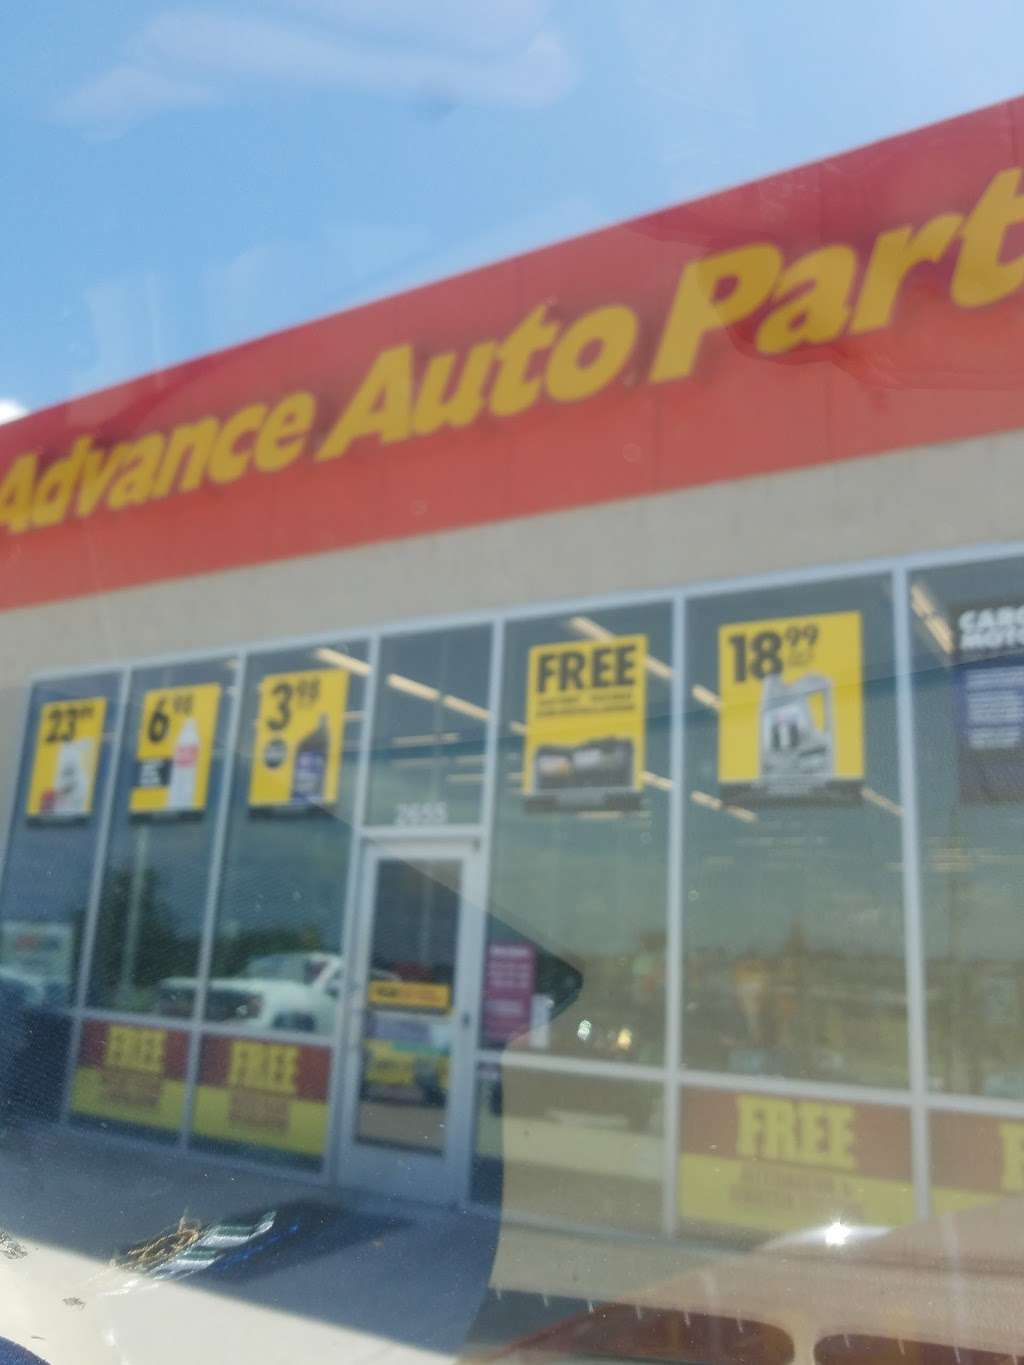 Advance Auto Parts | 2655 East W Hwy 50, Clermont, FL 34711, USA | Phone: (407) 287-5230